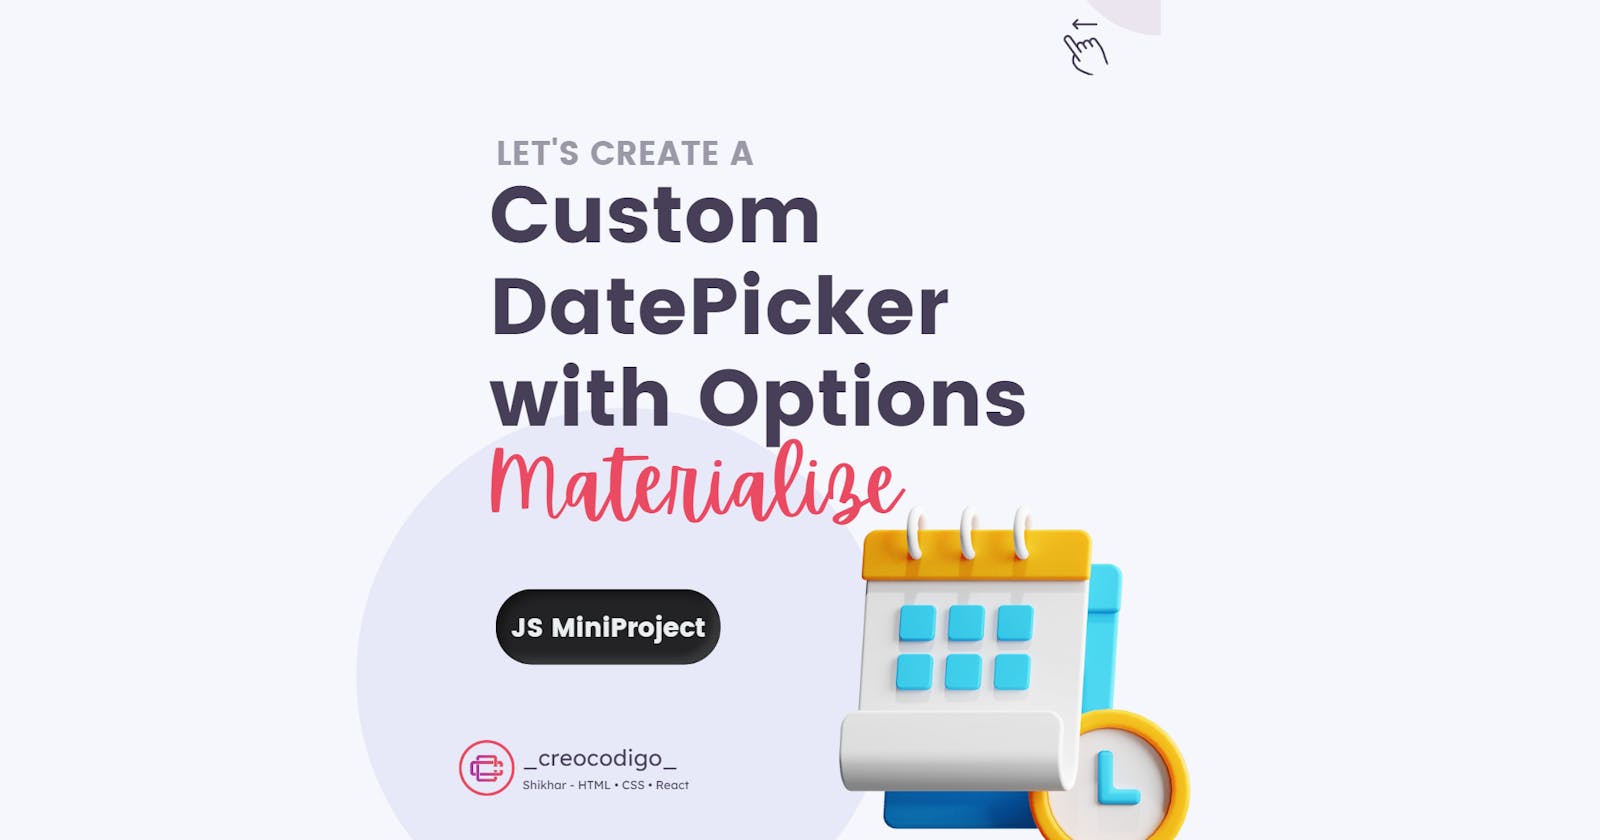 Custom DatePicker with Options using Materialize CSS